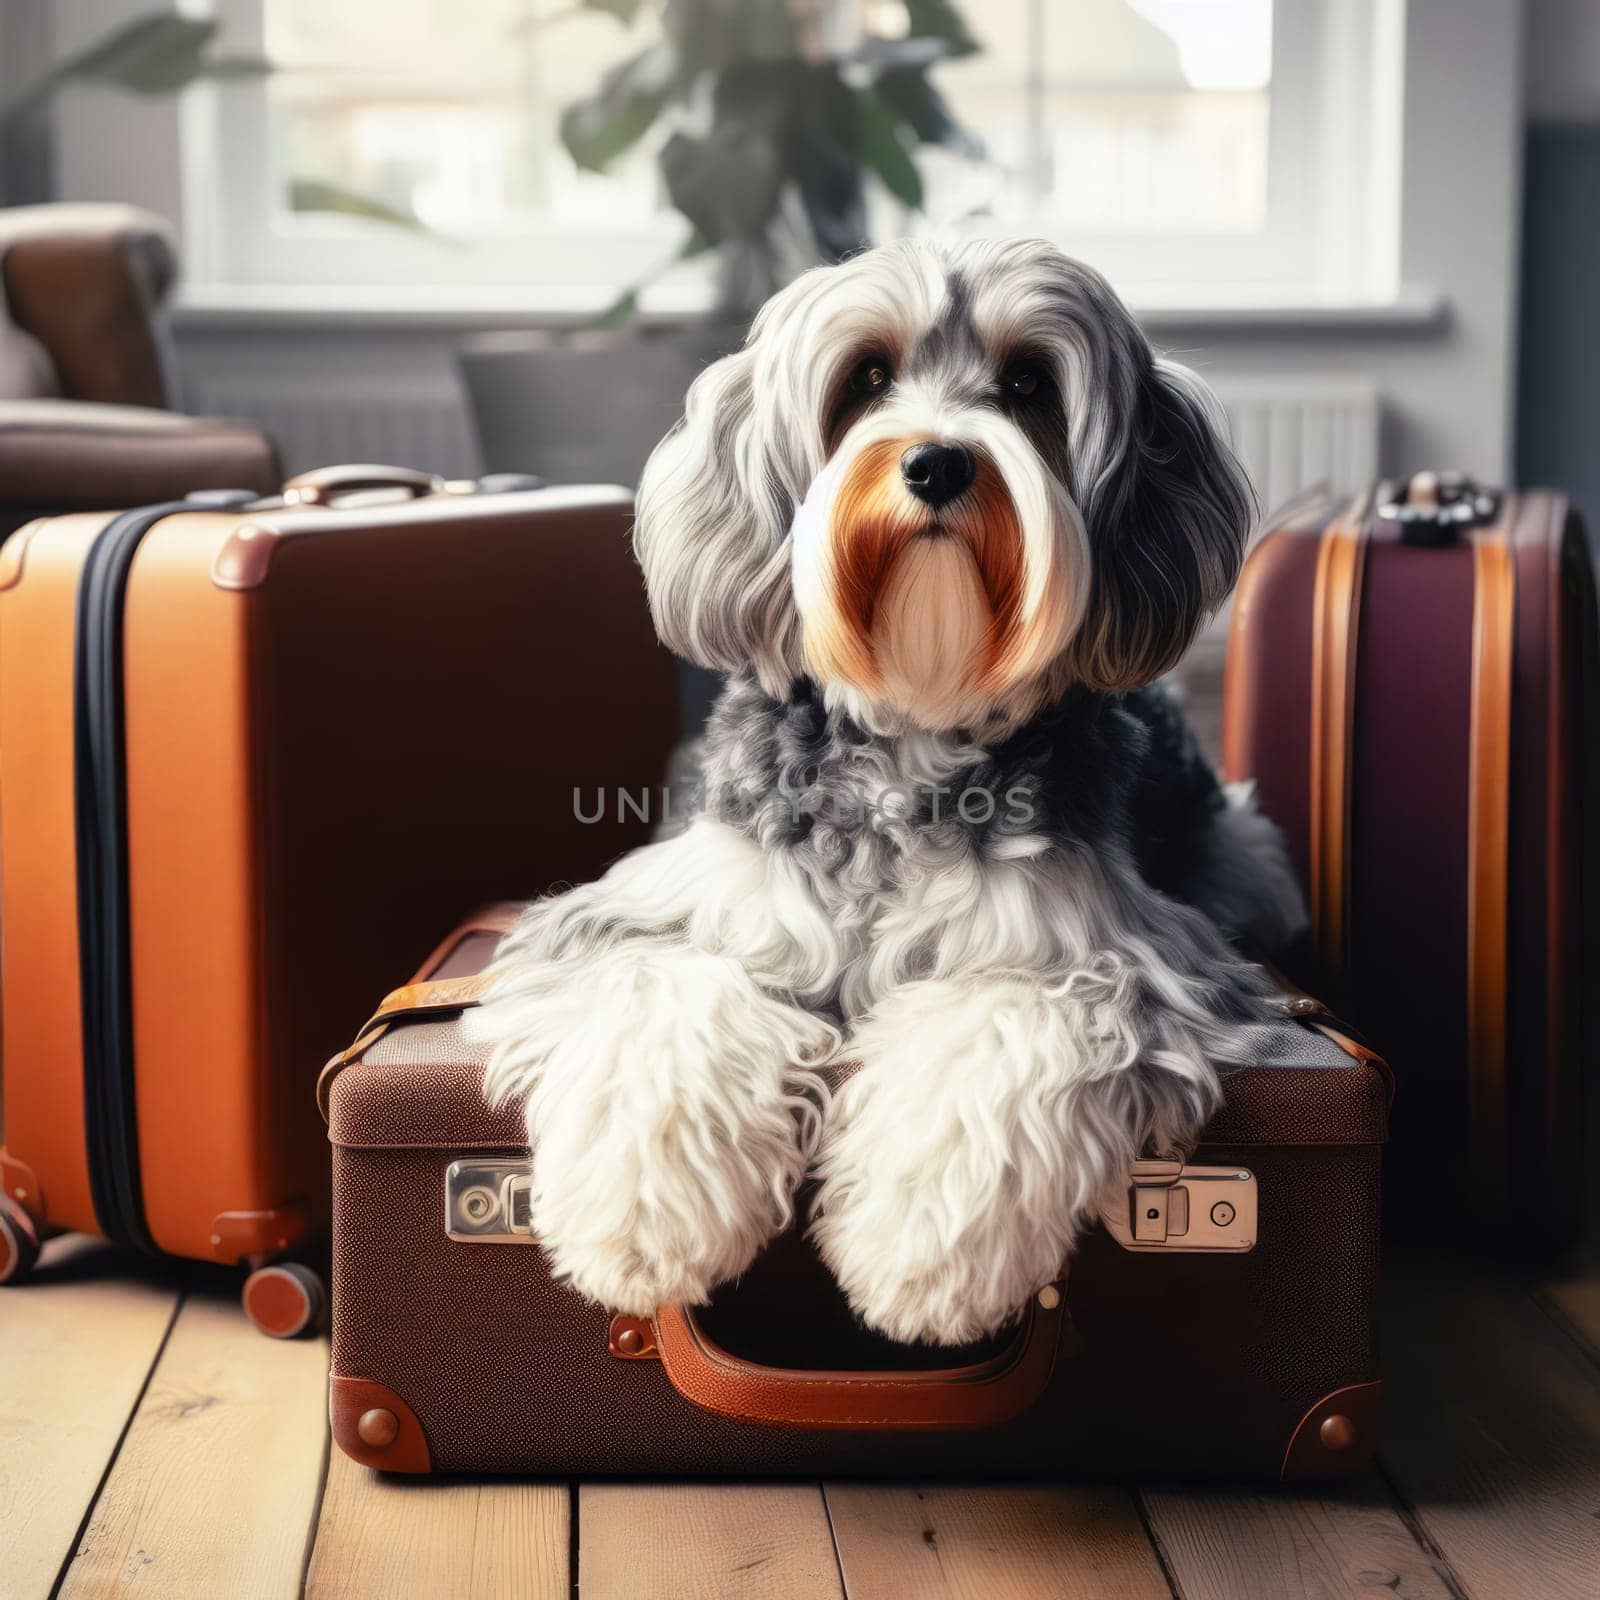 Adorable dog sitting on a suitcase, ready for travel, evoking a sense of adventure and companionship